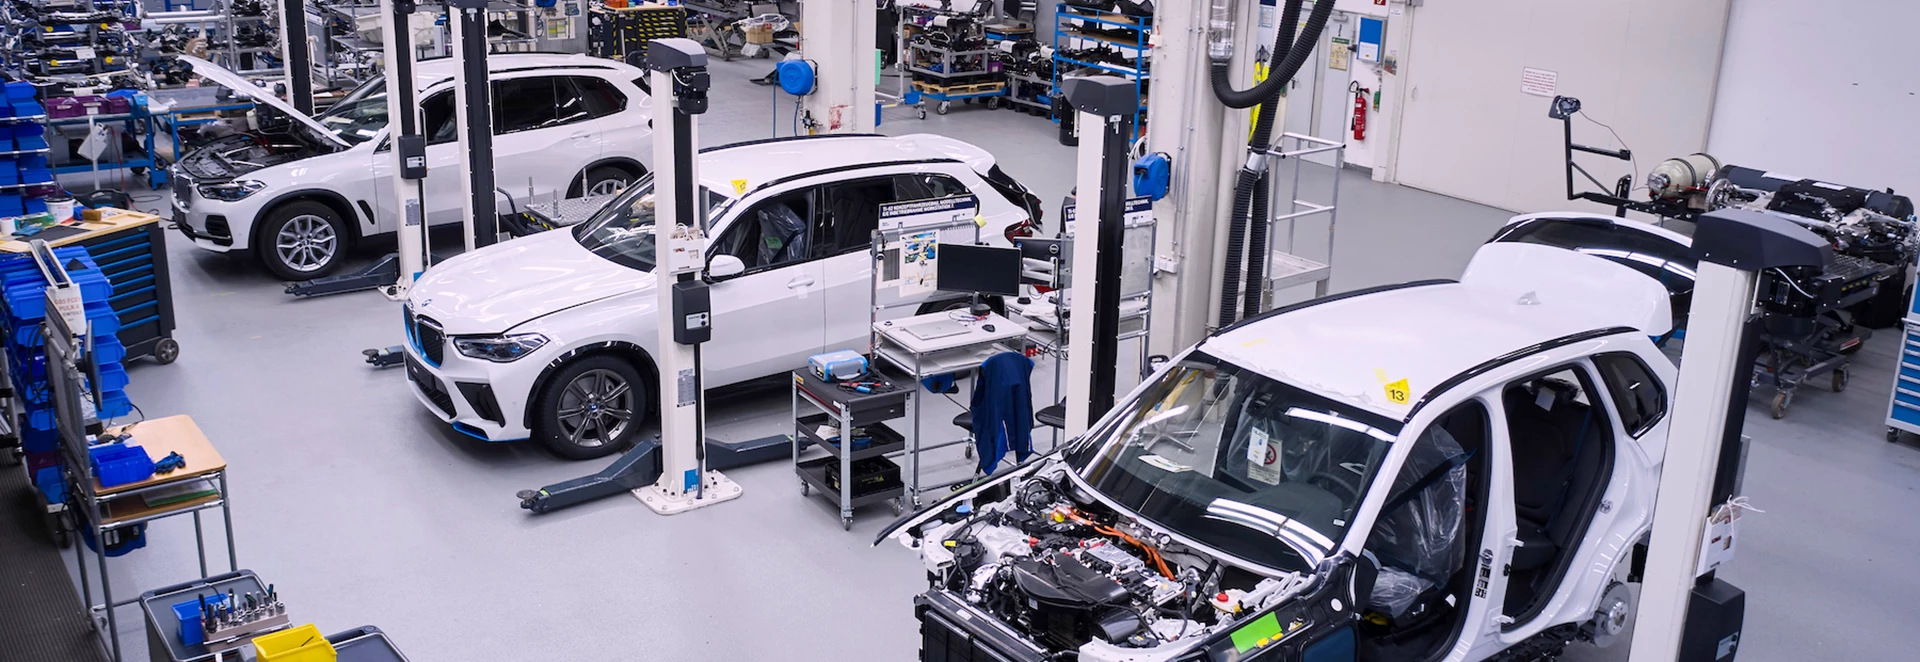 BMW starts production of hydrogen-powered X5 